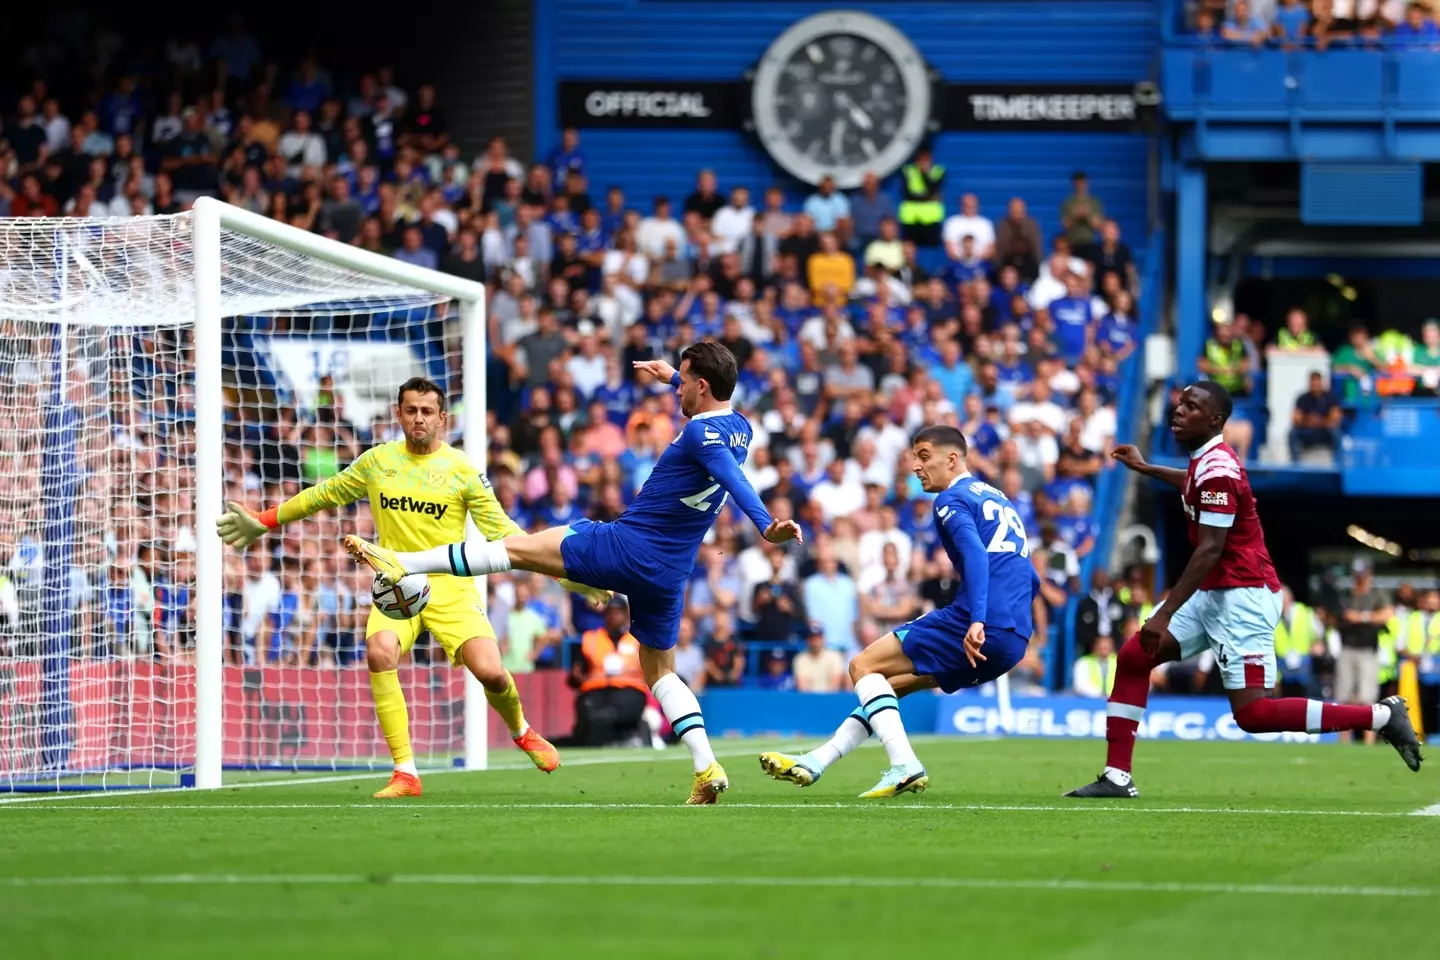 Ben Chilwell squeezes in Chelsea's equaliser against West Ham. (Chelsea FC)